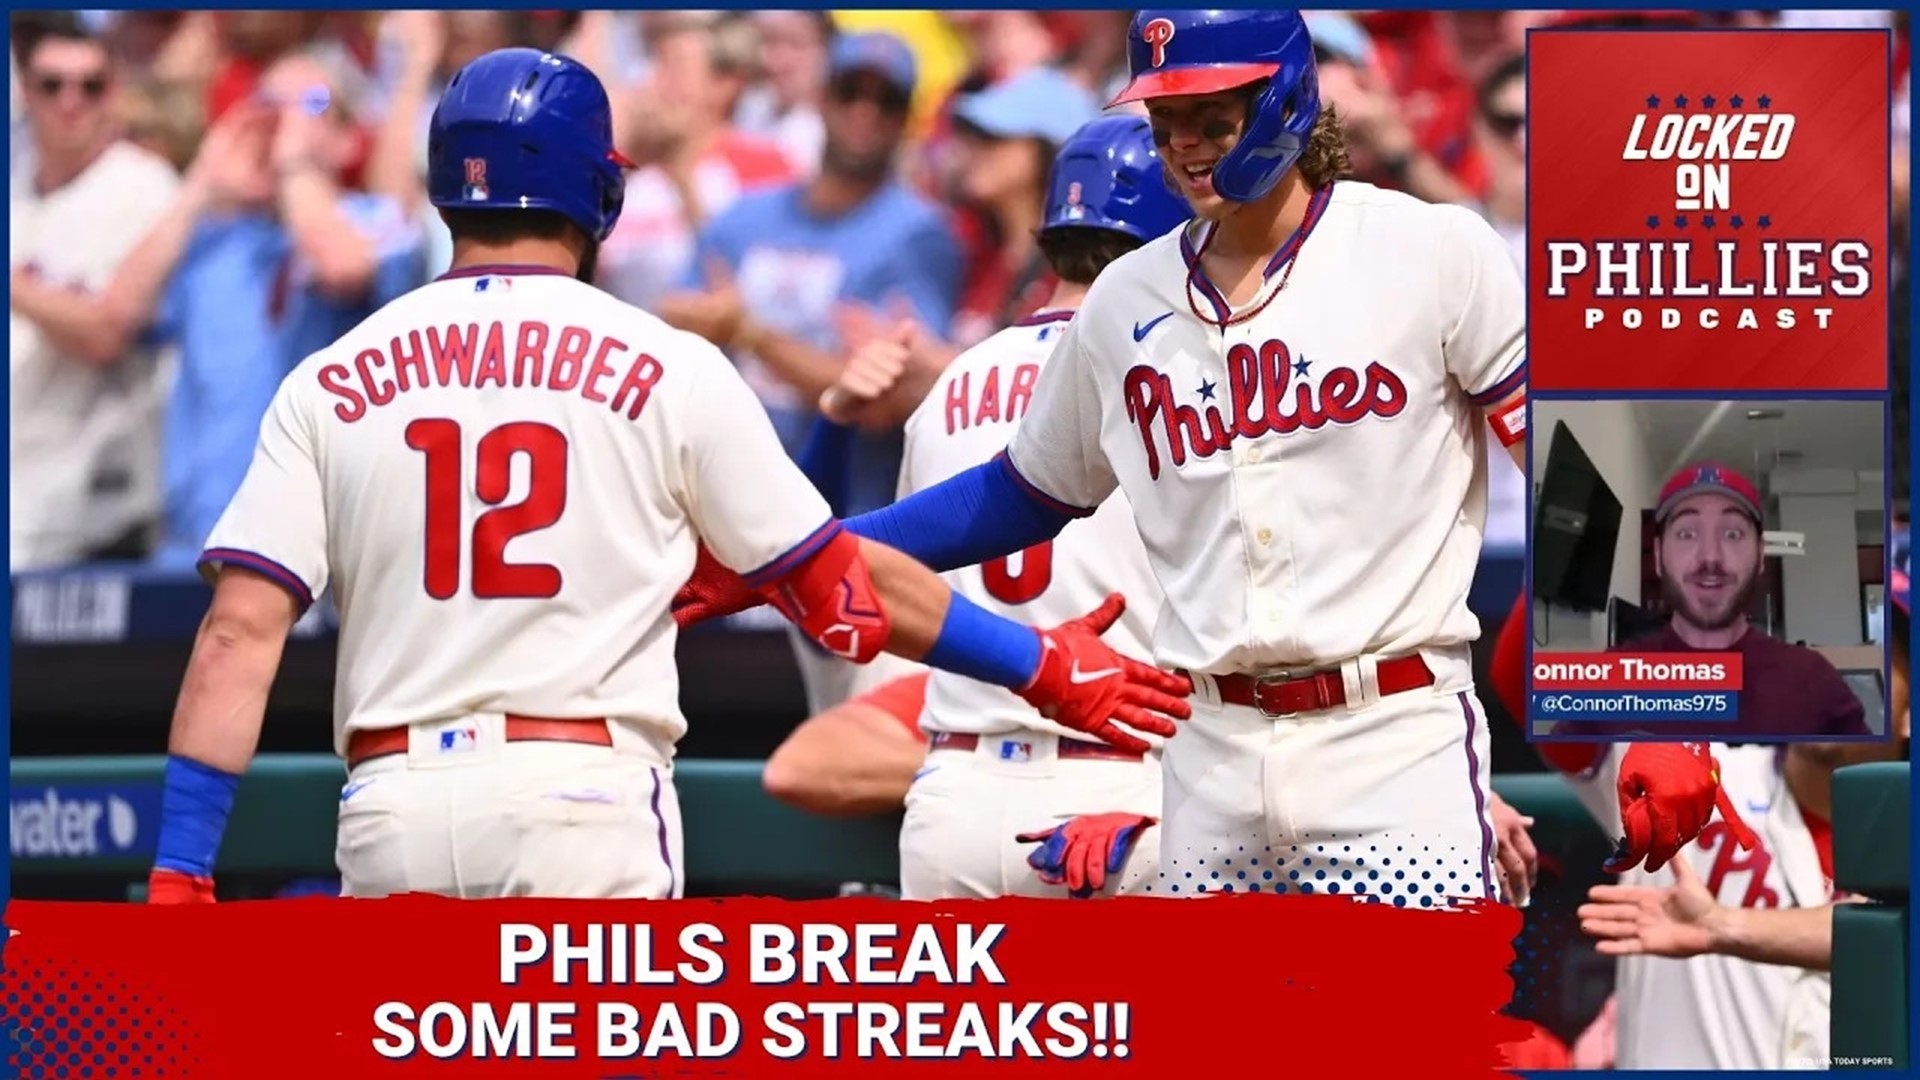 In today's episode, Connor reacts to the Philadelphia Phillies' 6-1 win over the Boston Red Sox on Sunday that snapped the Phillies' 6 game losing streak.